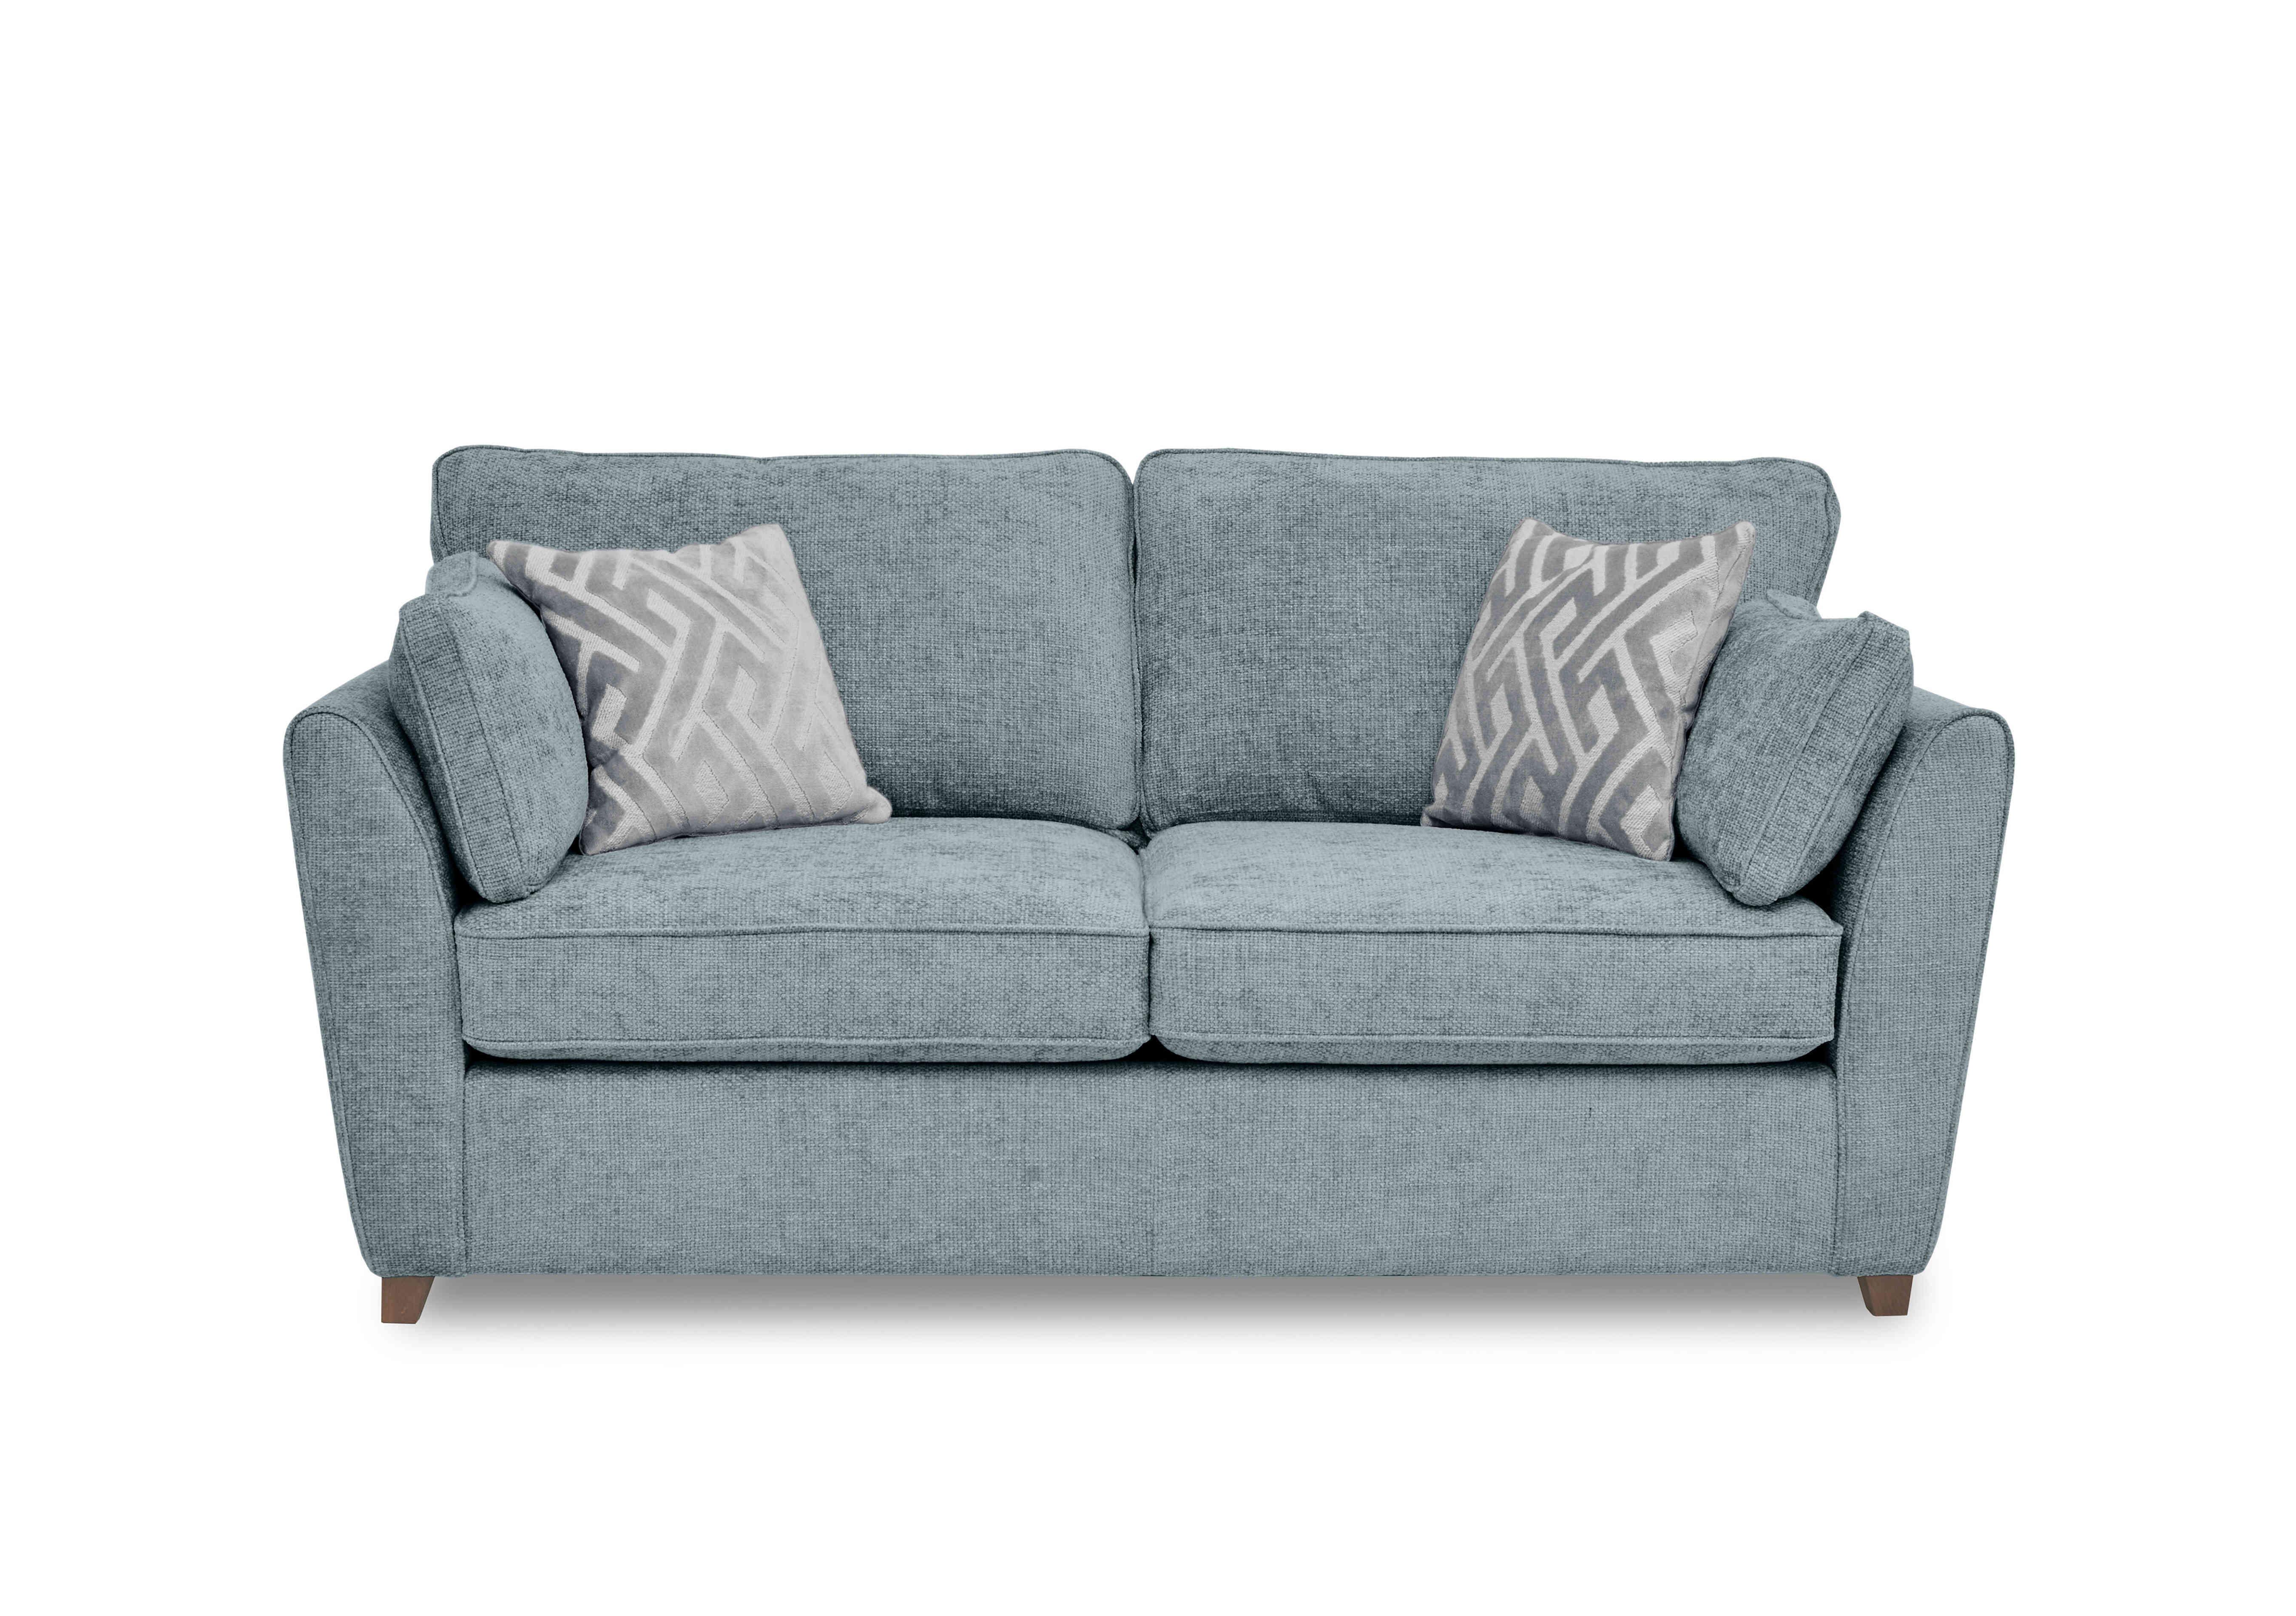 Tabitha 3 Seater Sofa Bed in Duck Egg on Furniture Village